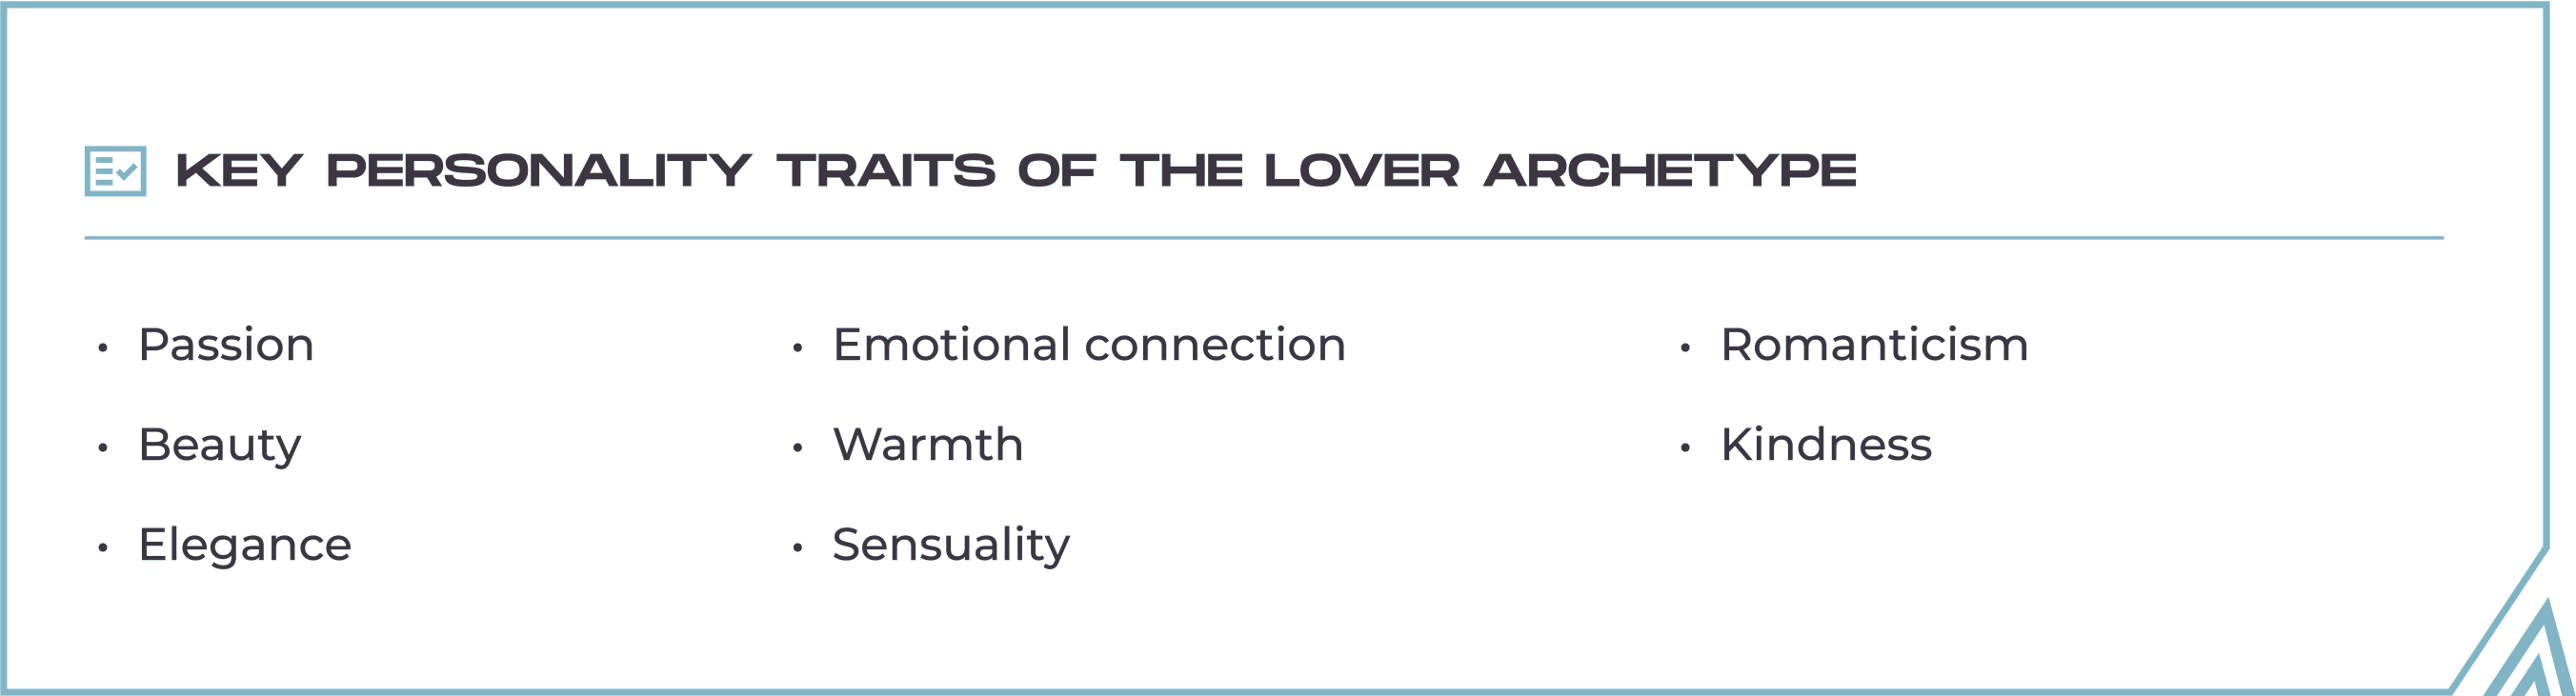 Key Personality Traits of The Lover